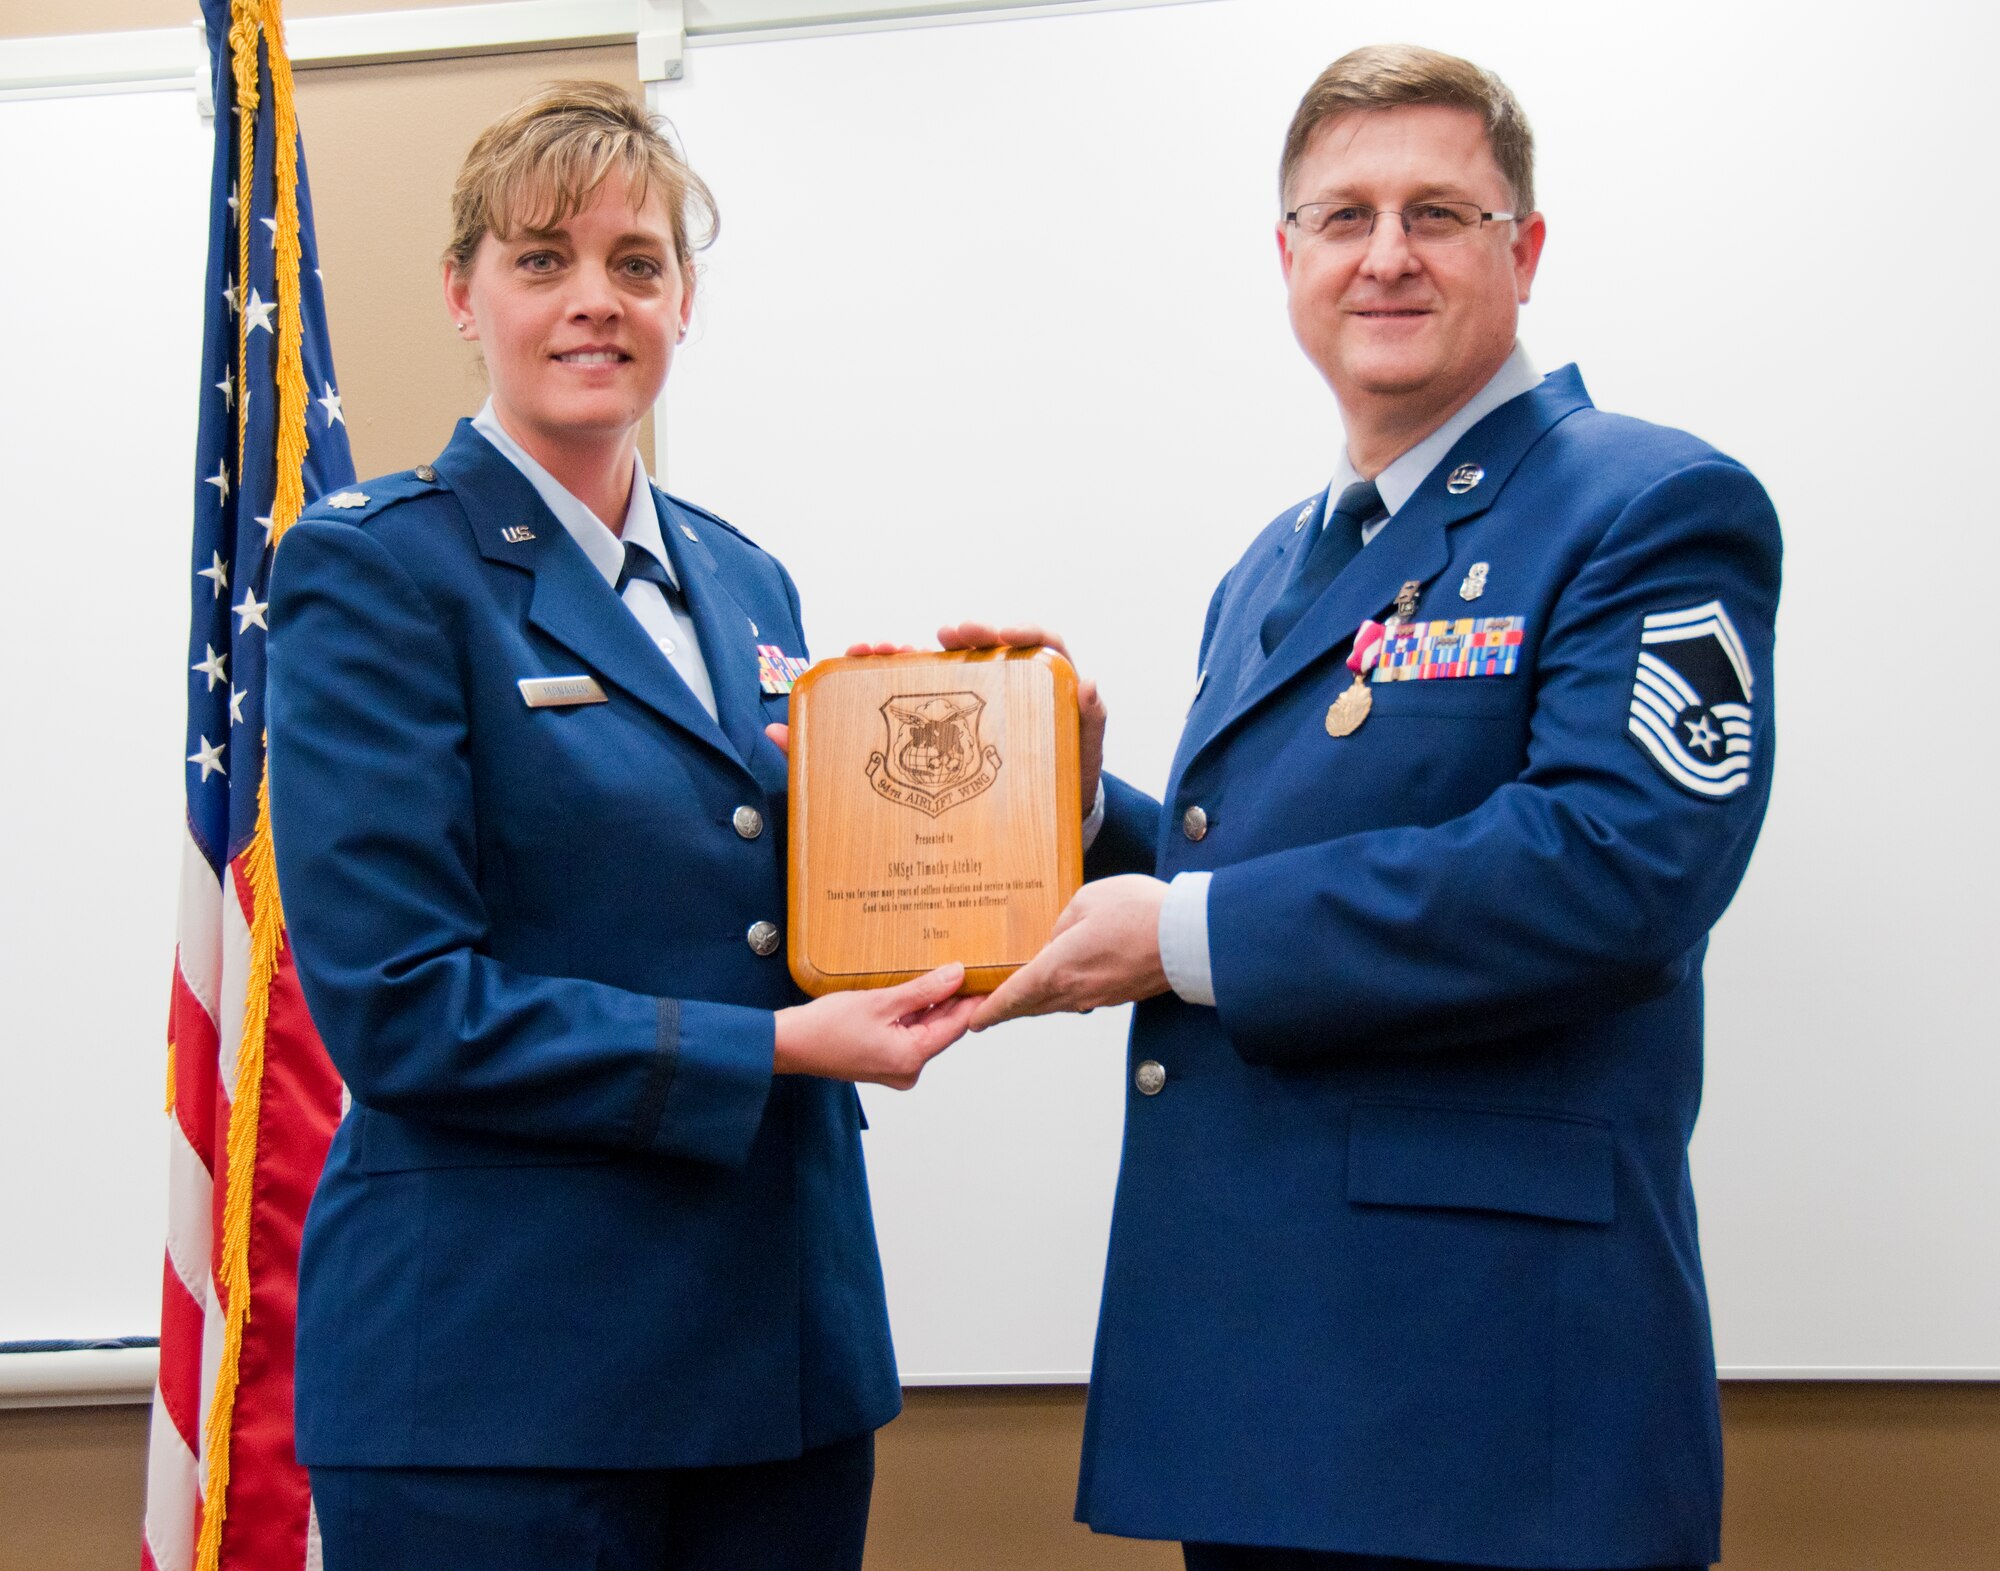 Senior Master Sgt. Timothy O. Atchley receives a plaque from Lt. Col. Tracy L. Monahan, commemorating his 24 years of military service during his retirement ceremony at the 934th Aeromedical Staging Squadron on March 4, 2012.  Sergeant Atchley will remain with ASTS as a civilian employee at the Minneapolis-St. Paul Air Reserve Station, Minn.  (Air Force Photo/Tech. Sgt. Jim Loehr)